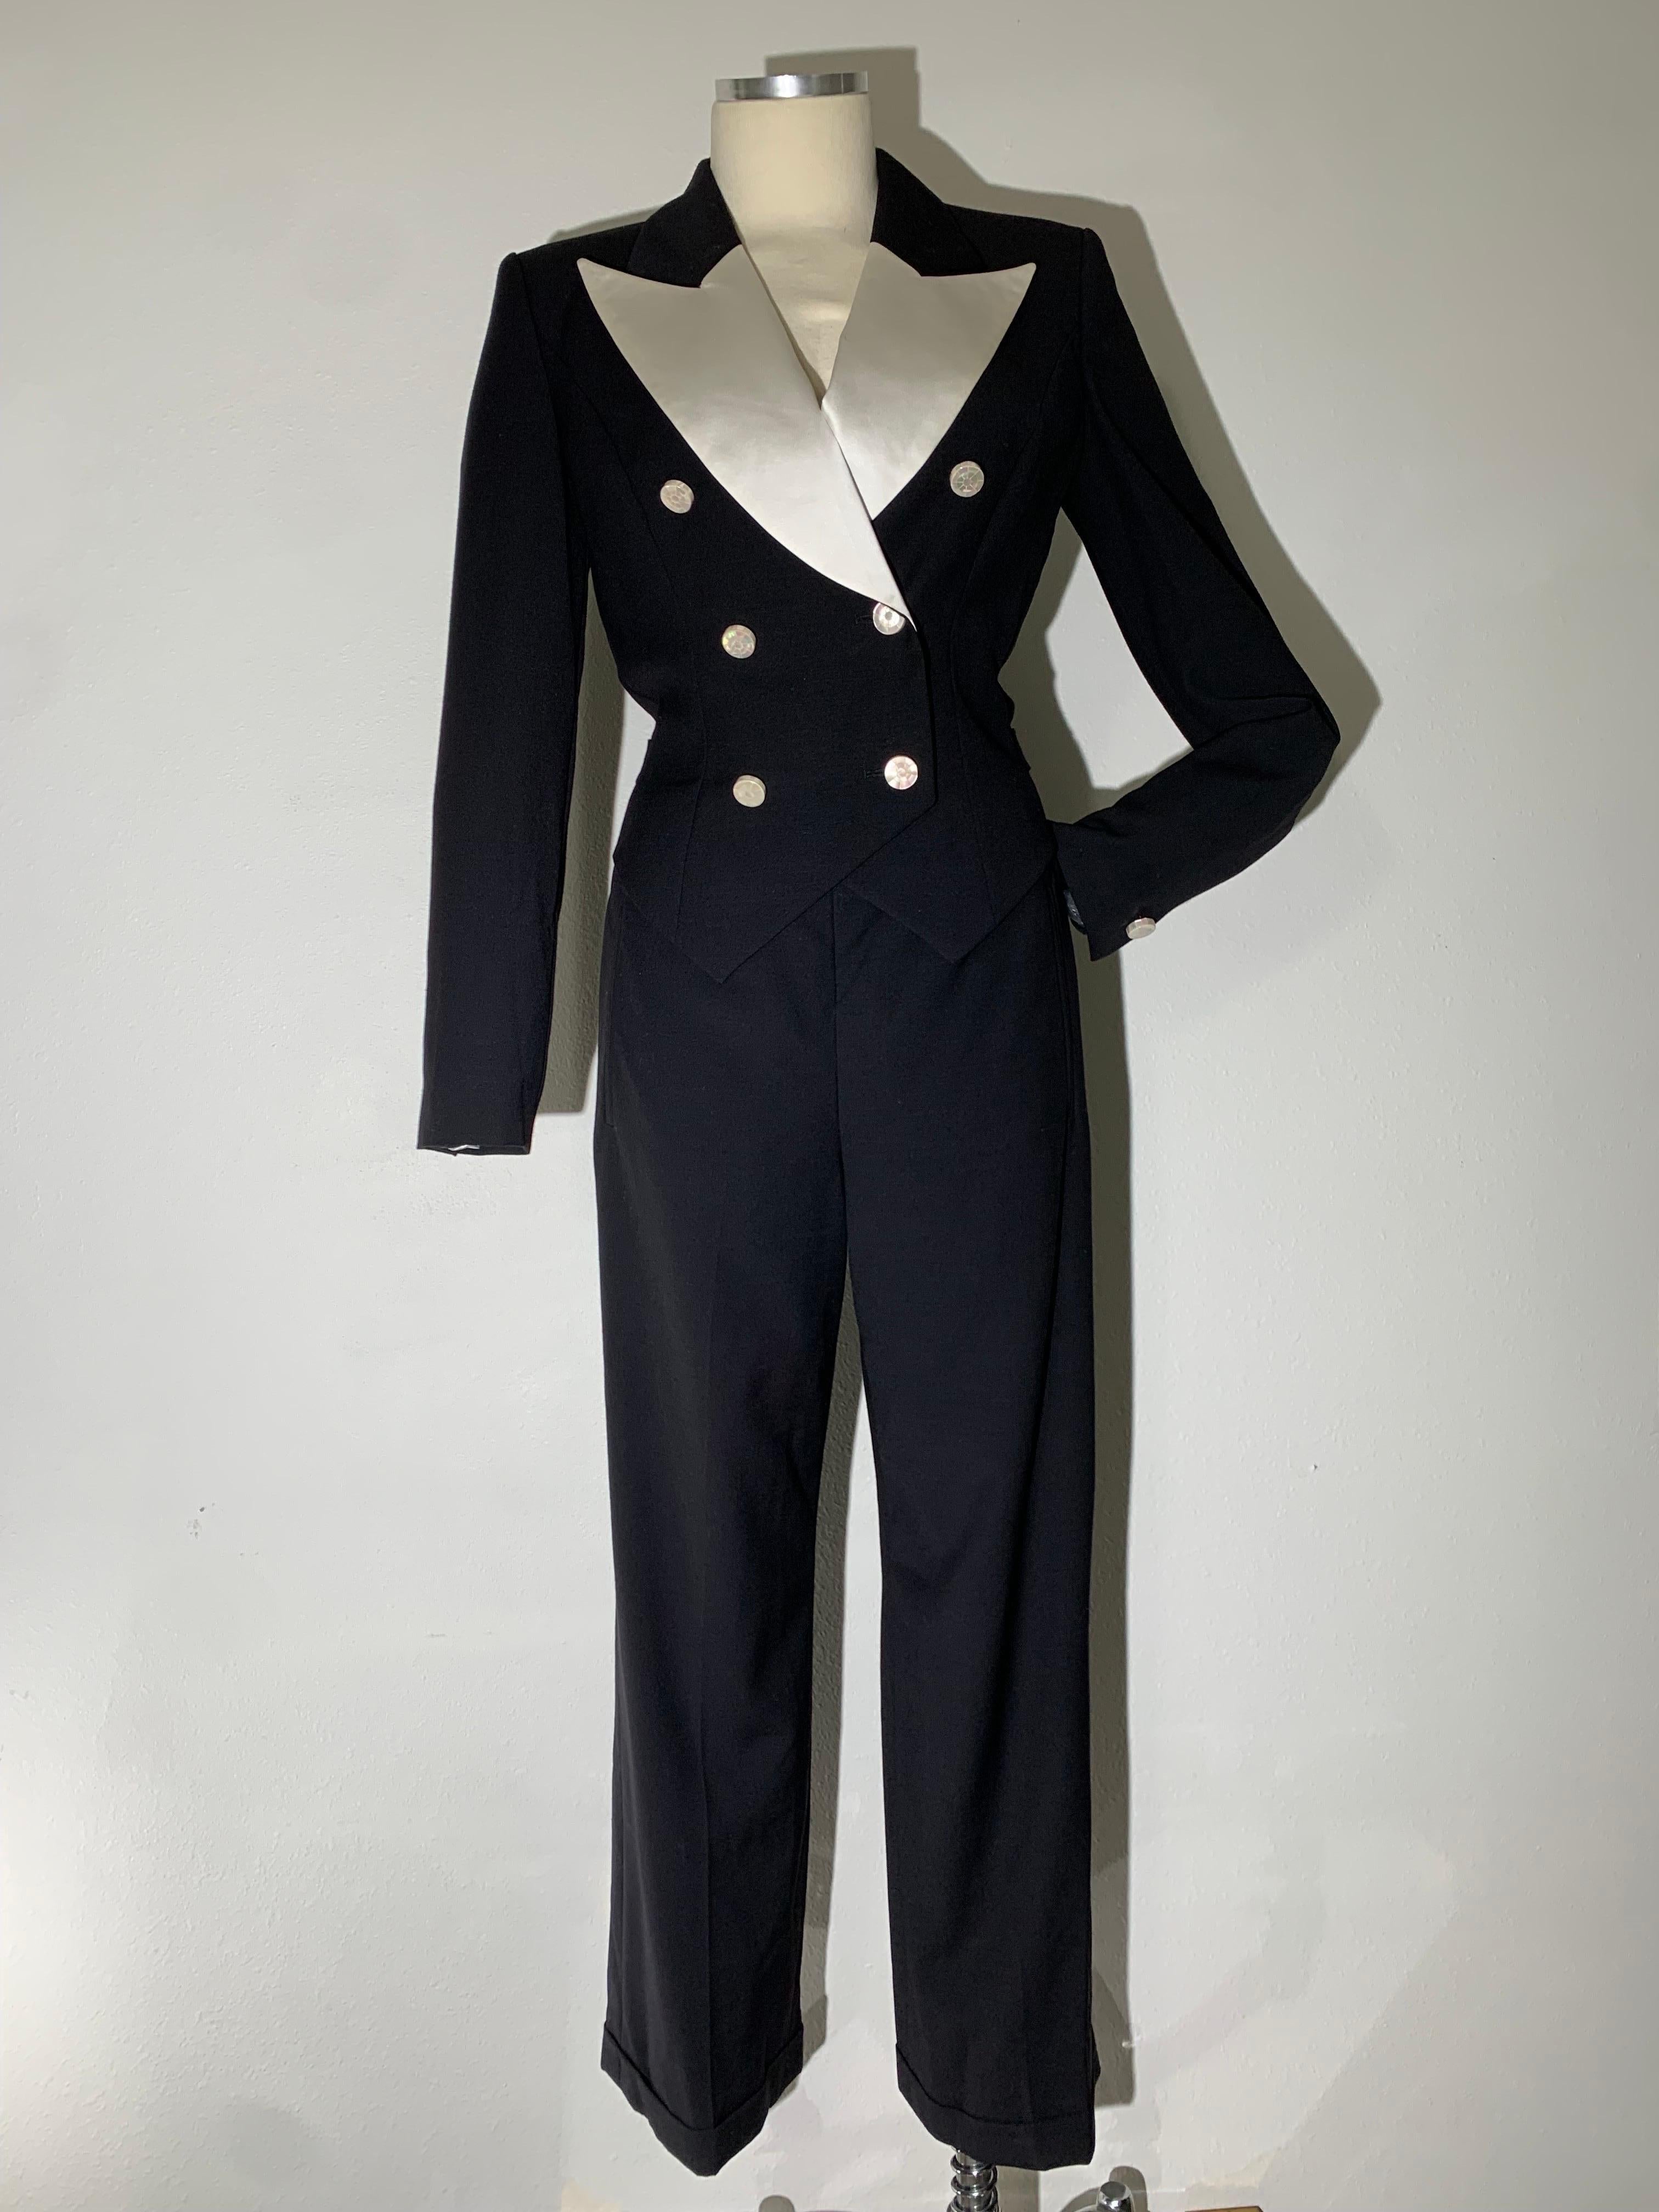 Escada By Margaretha Ley Black Wool Gabardine and White Silk Satin Tuxedo-Style Jumpsuit:  Double breasted, with wide peaked 40s-style lapels, mother of pearl buttons at front and cuffs. Shaped sculpted waist silhouette with a small belt at back for